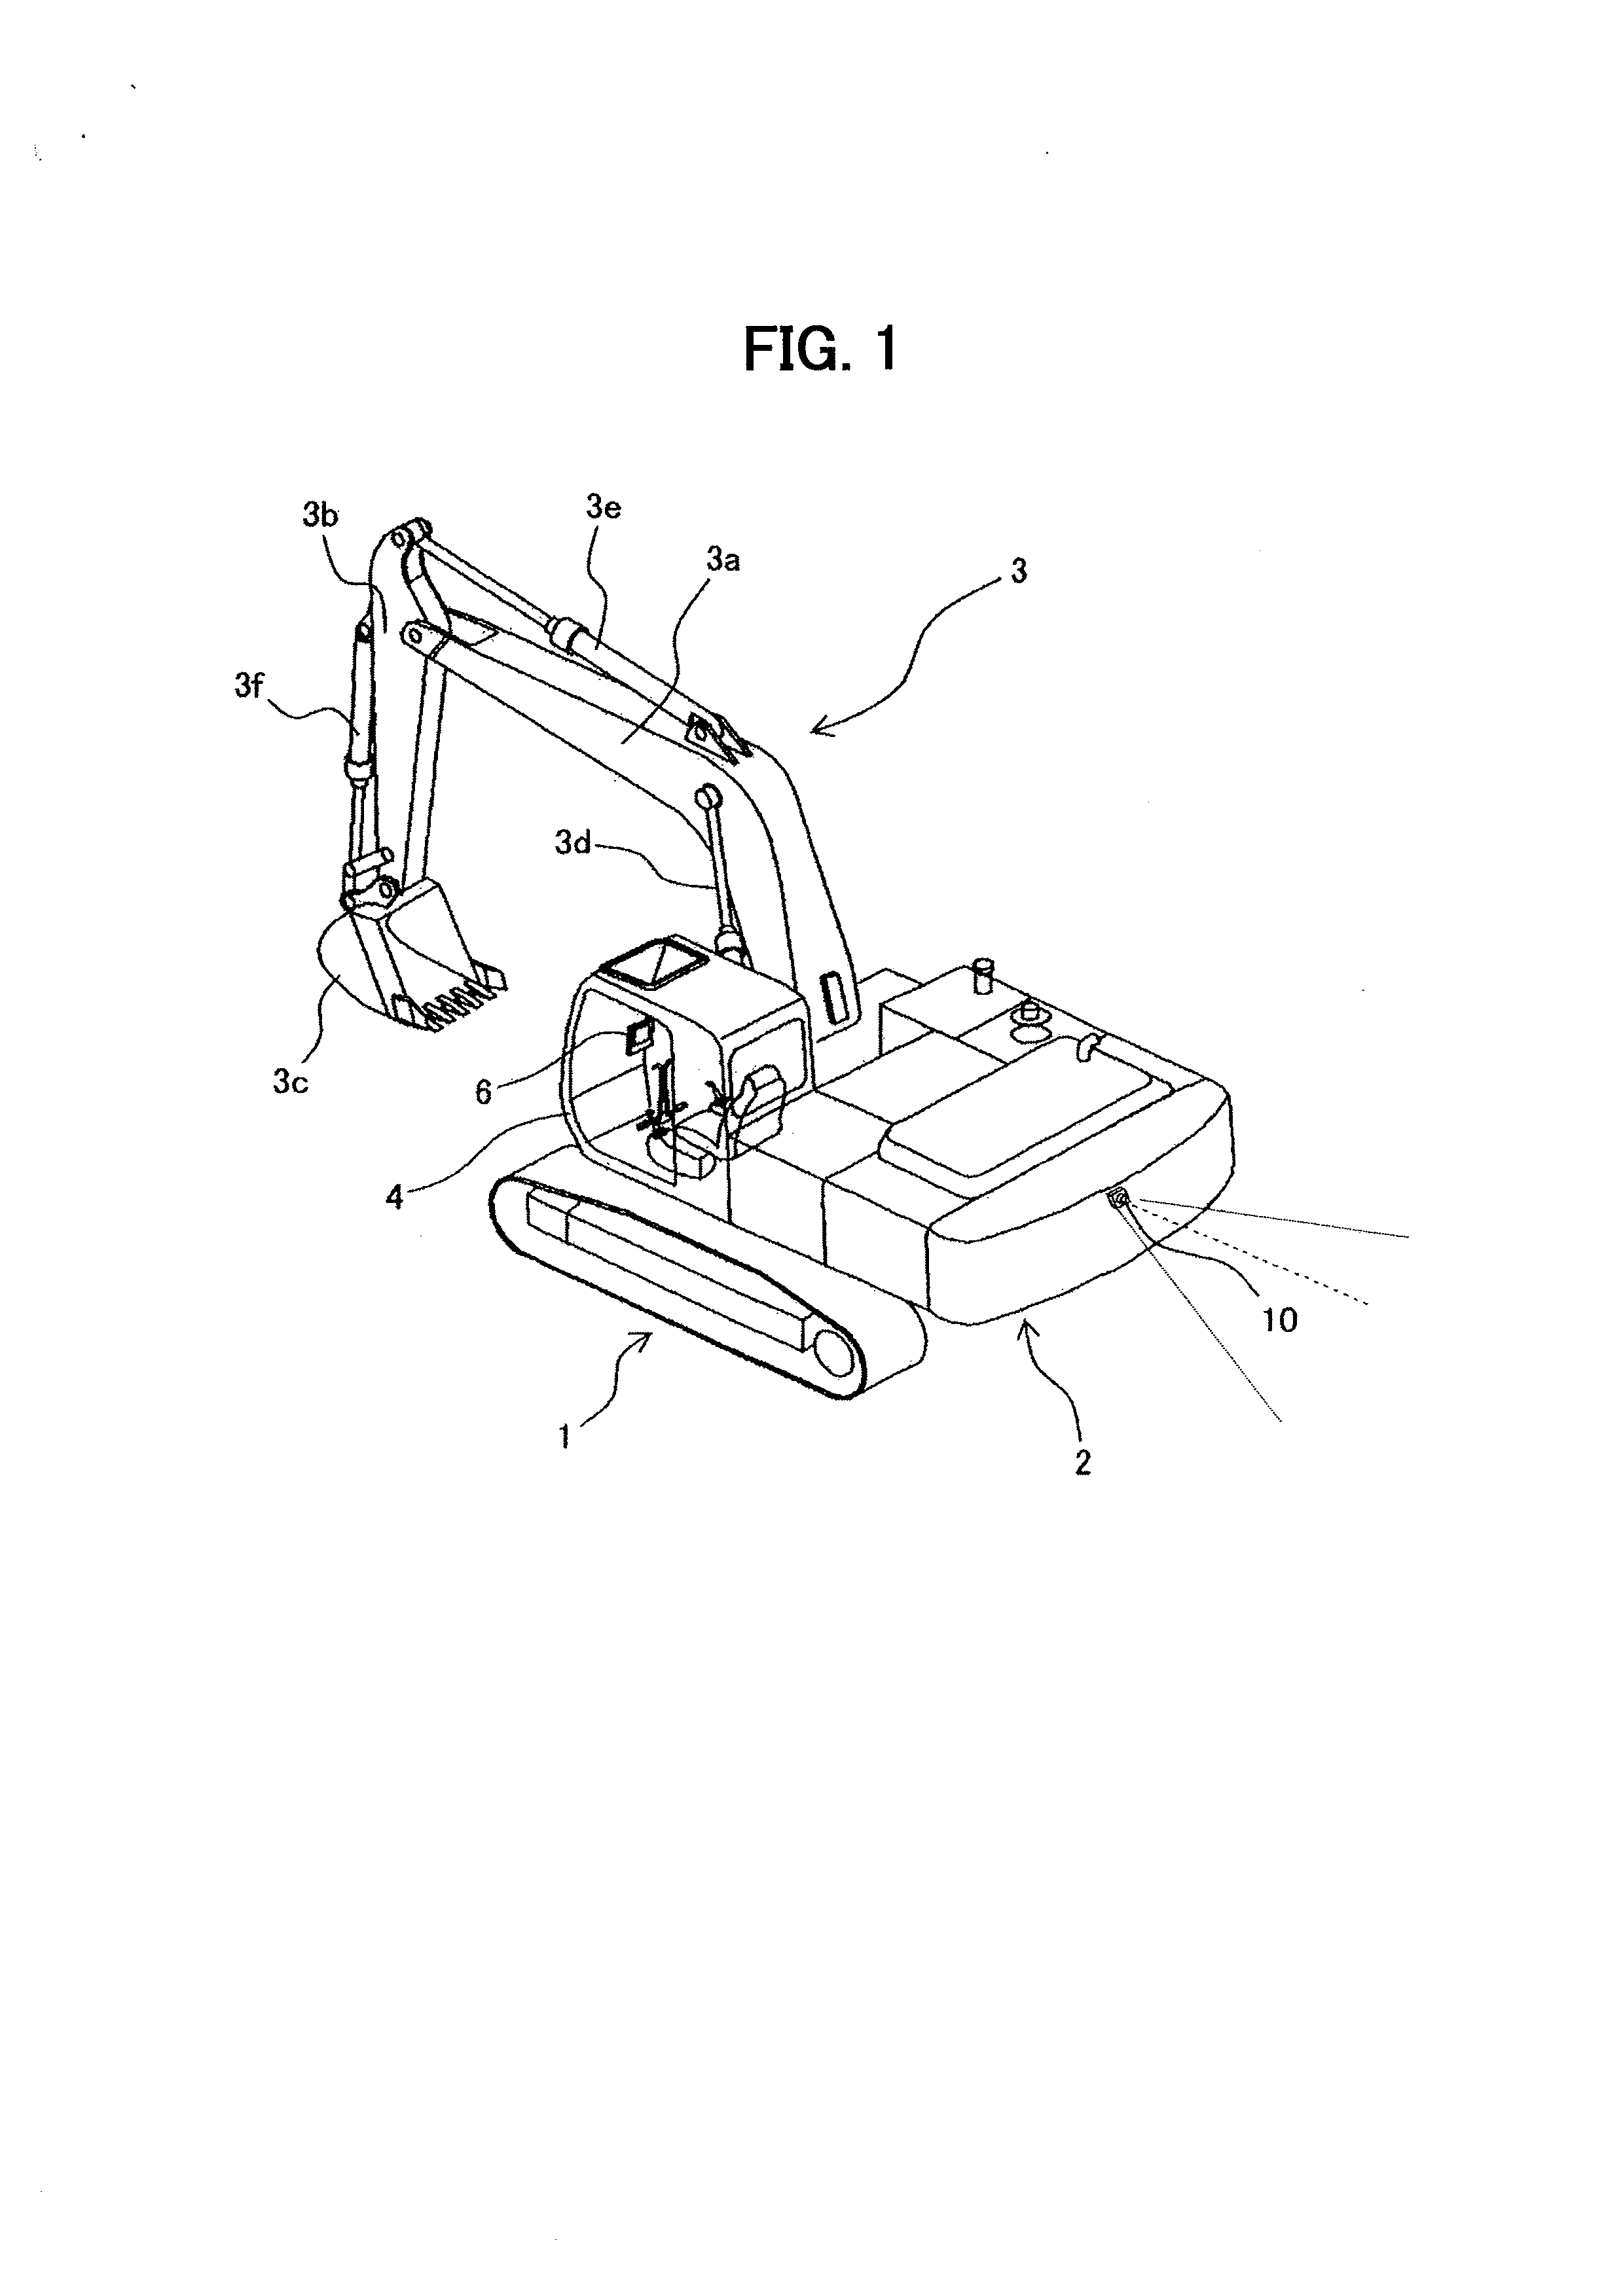 Display system for working machine